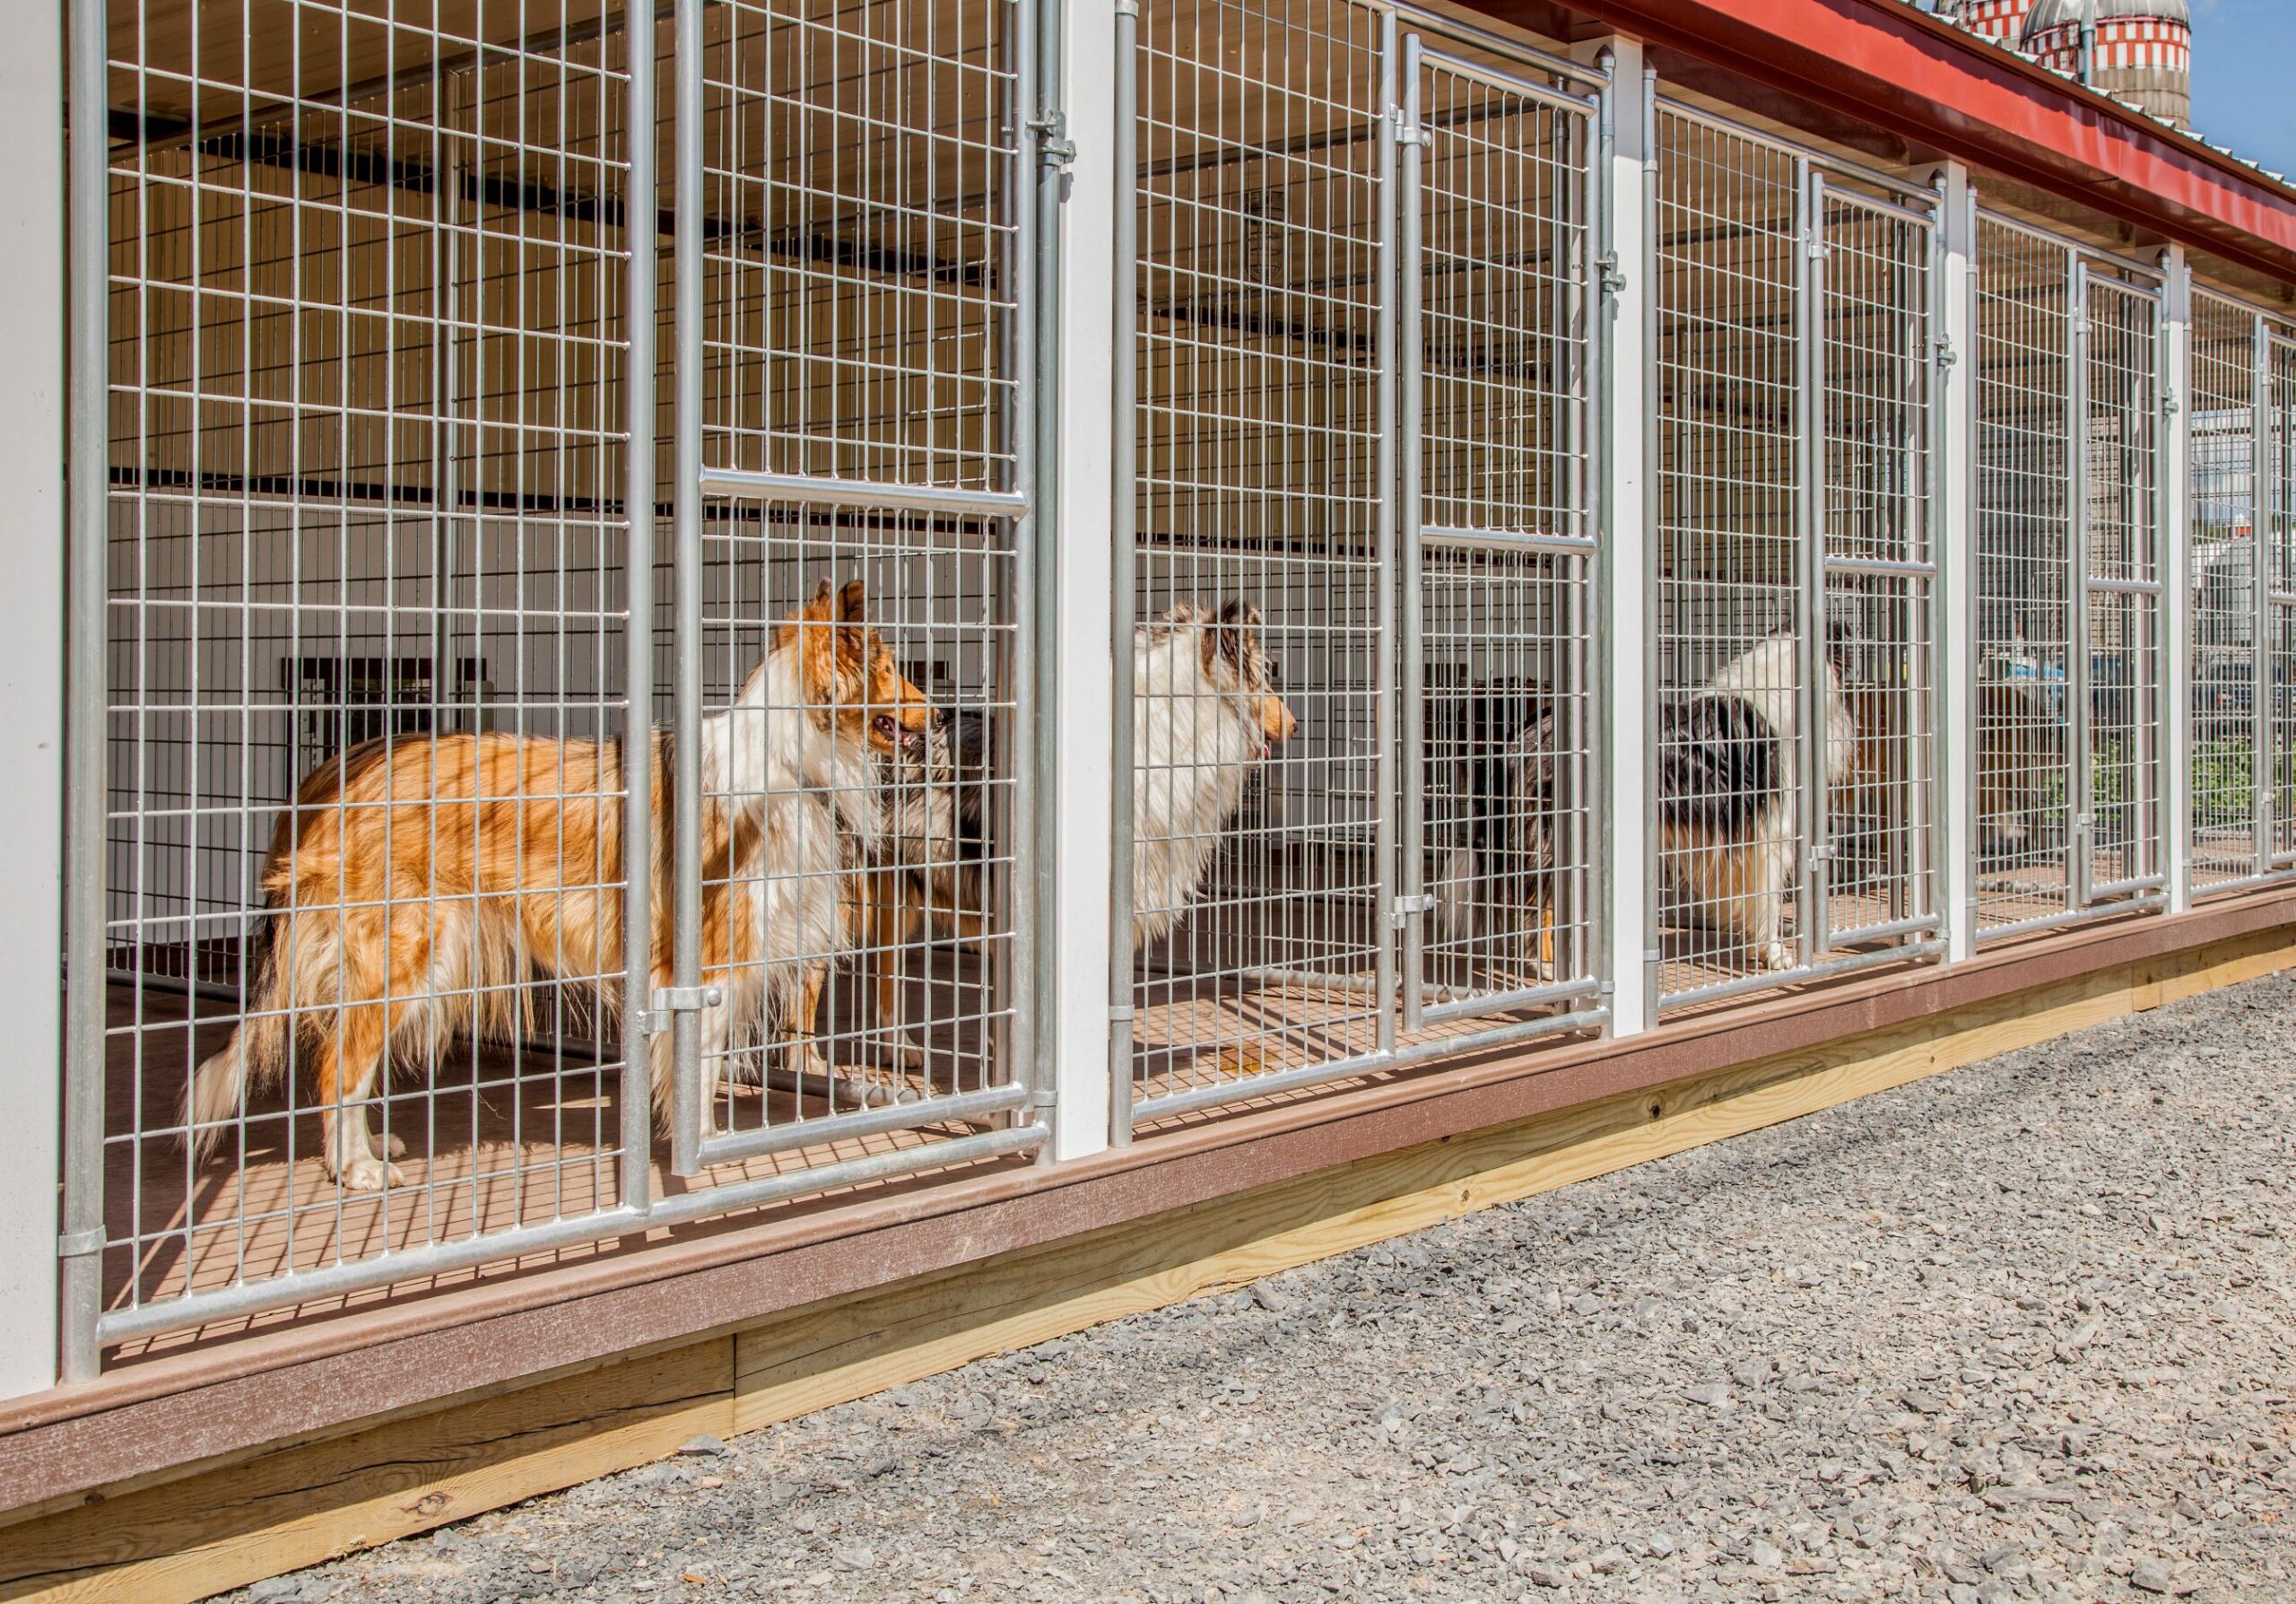 Dogs in a 20x60 dog kennel with 12 individual boxes